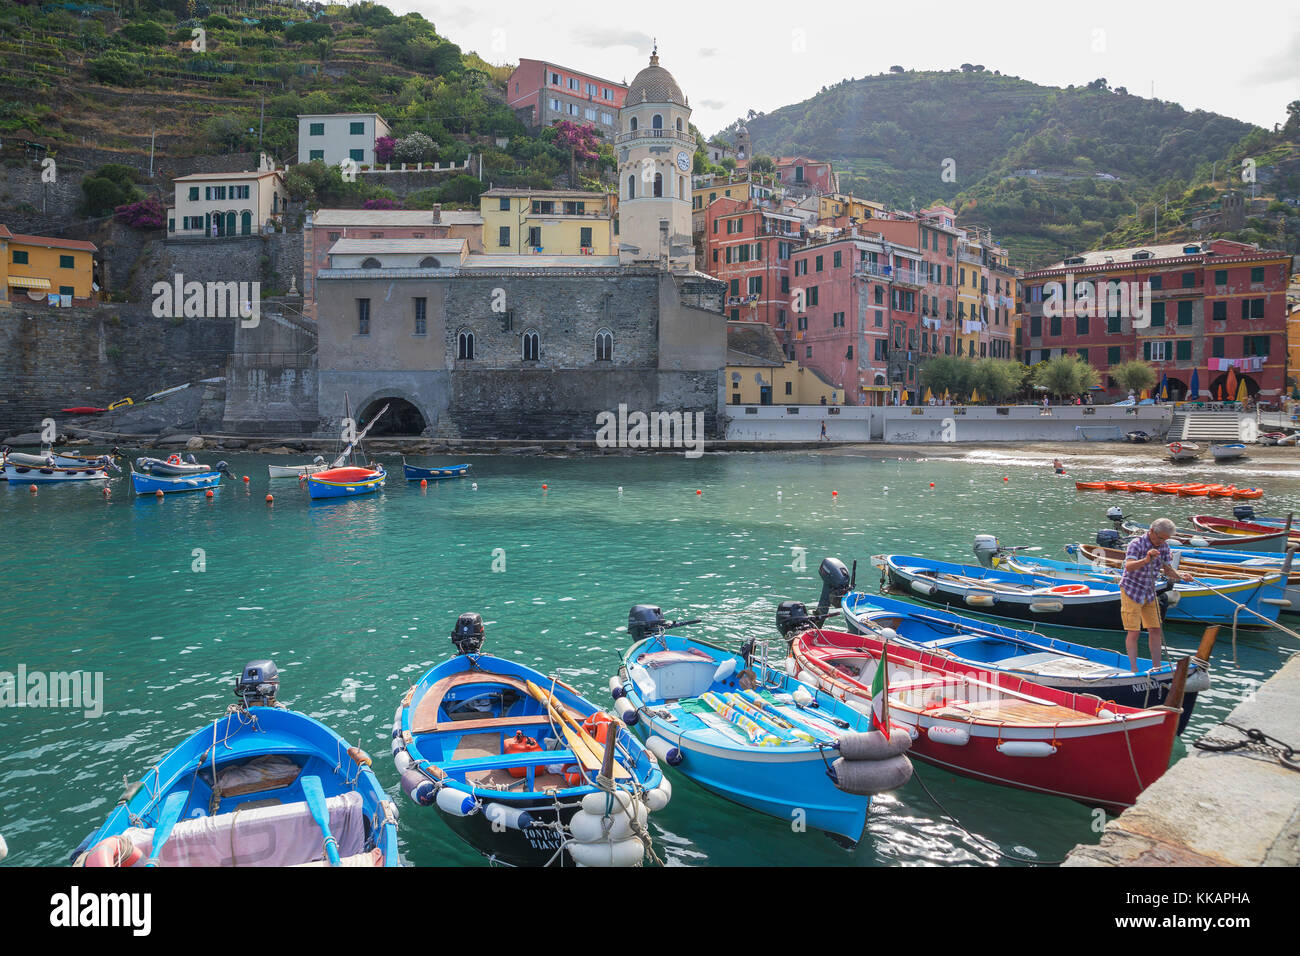 Harbour and boats, Vernazza, Cinque Terre, UNESCO World Heritage Site, Liguria, Italy, Europe Stock Photo